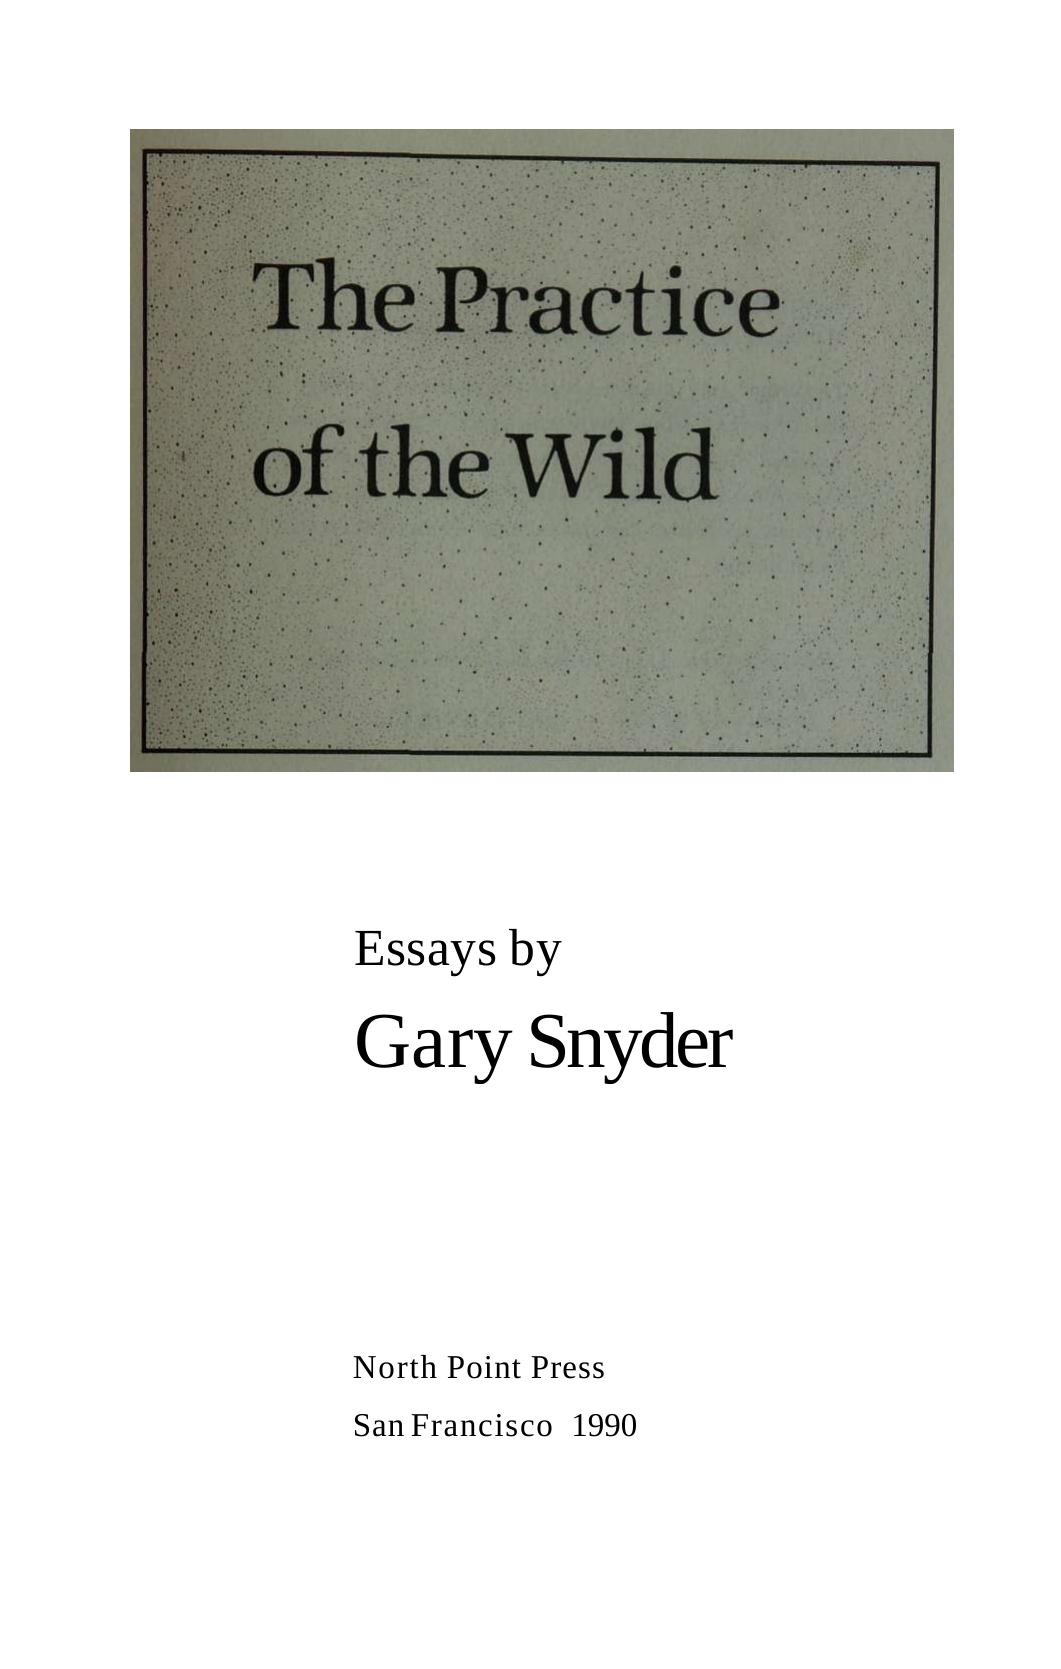 The Practice of the Wild by Gary Snyder